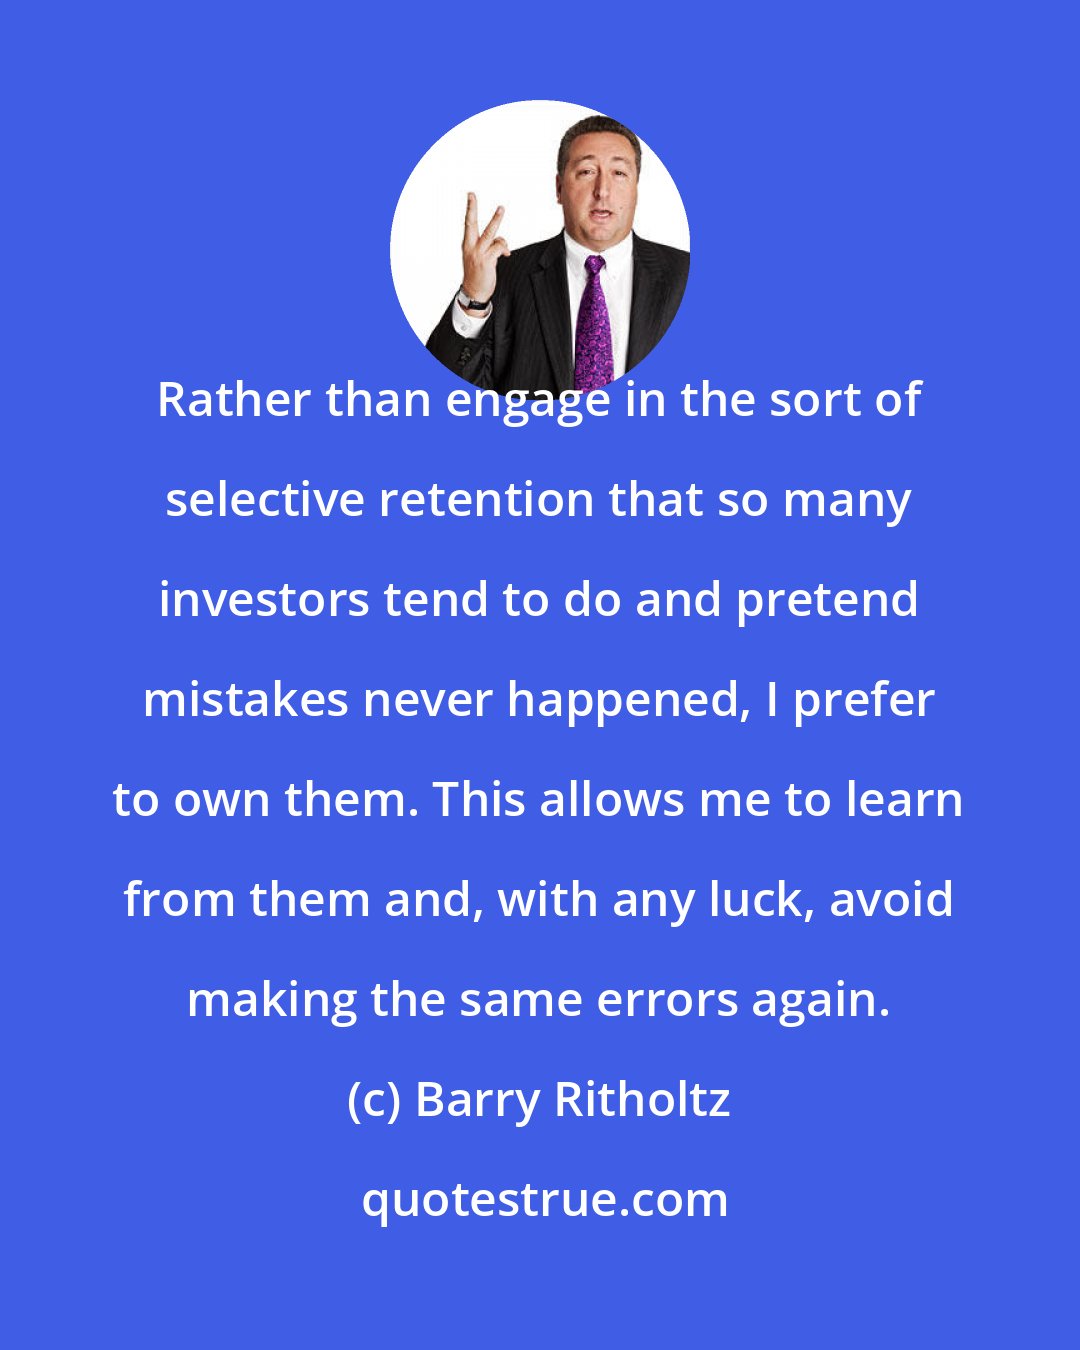 Barry Ritholtz: Rather than engage in the sort of selective retention that so many investors tend to do and pretend mistakes never happened, I prefer to own them. This allows me to learn from them and, with any luck, avoid making the same errors again.